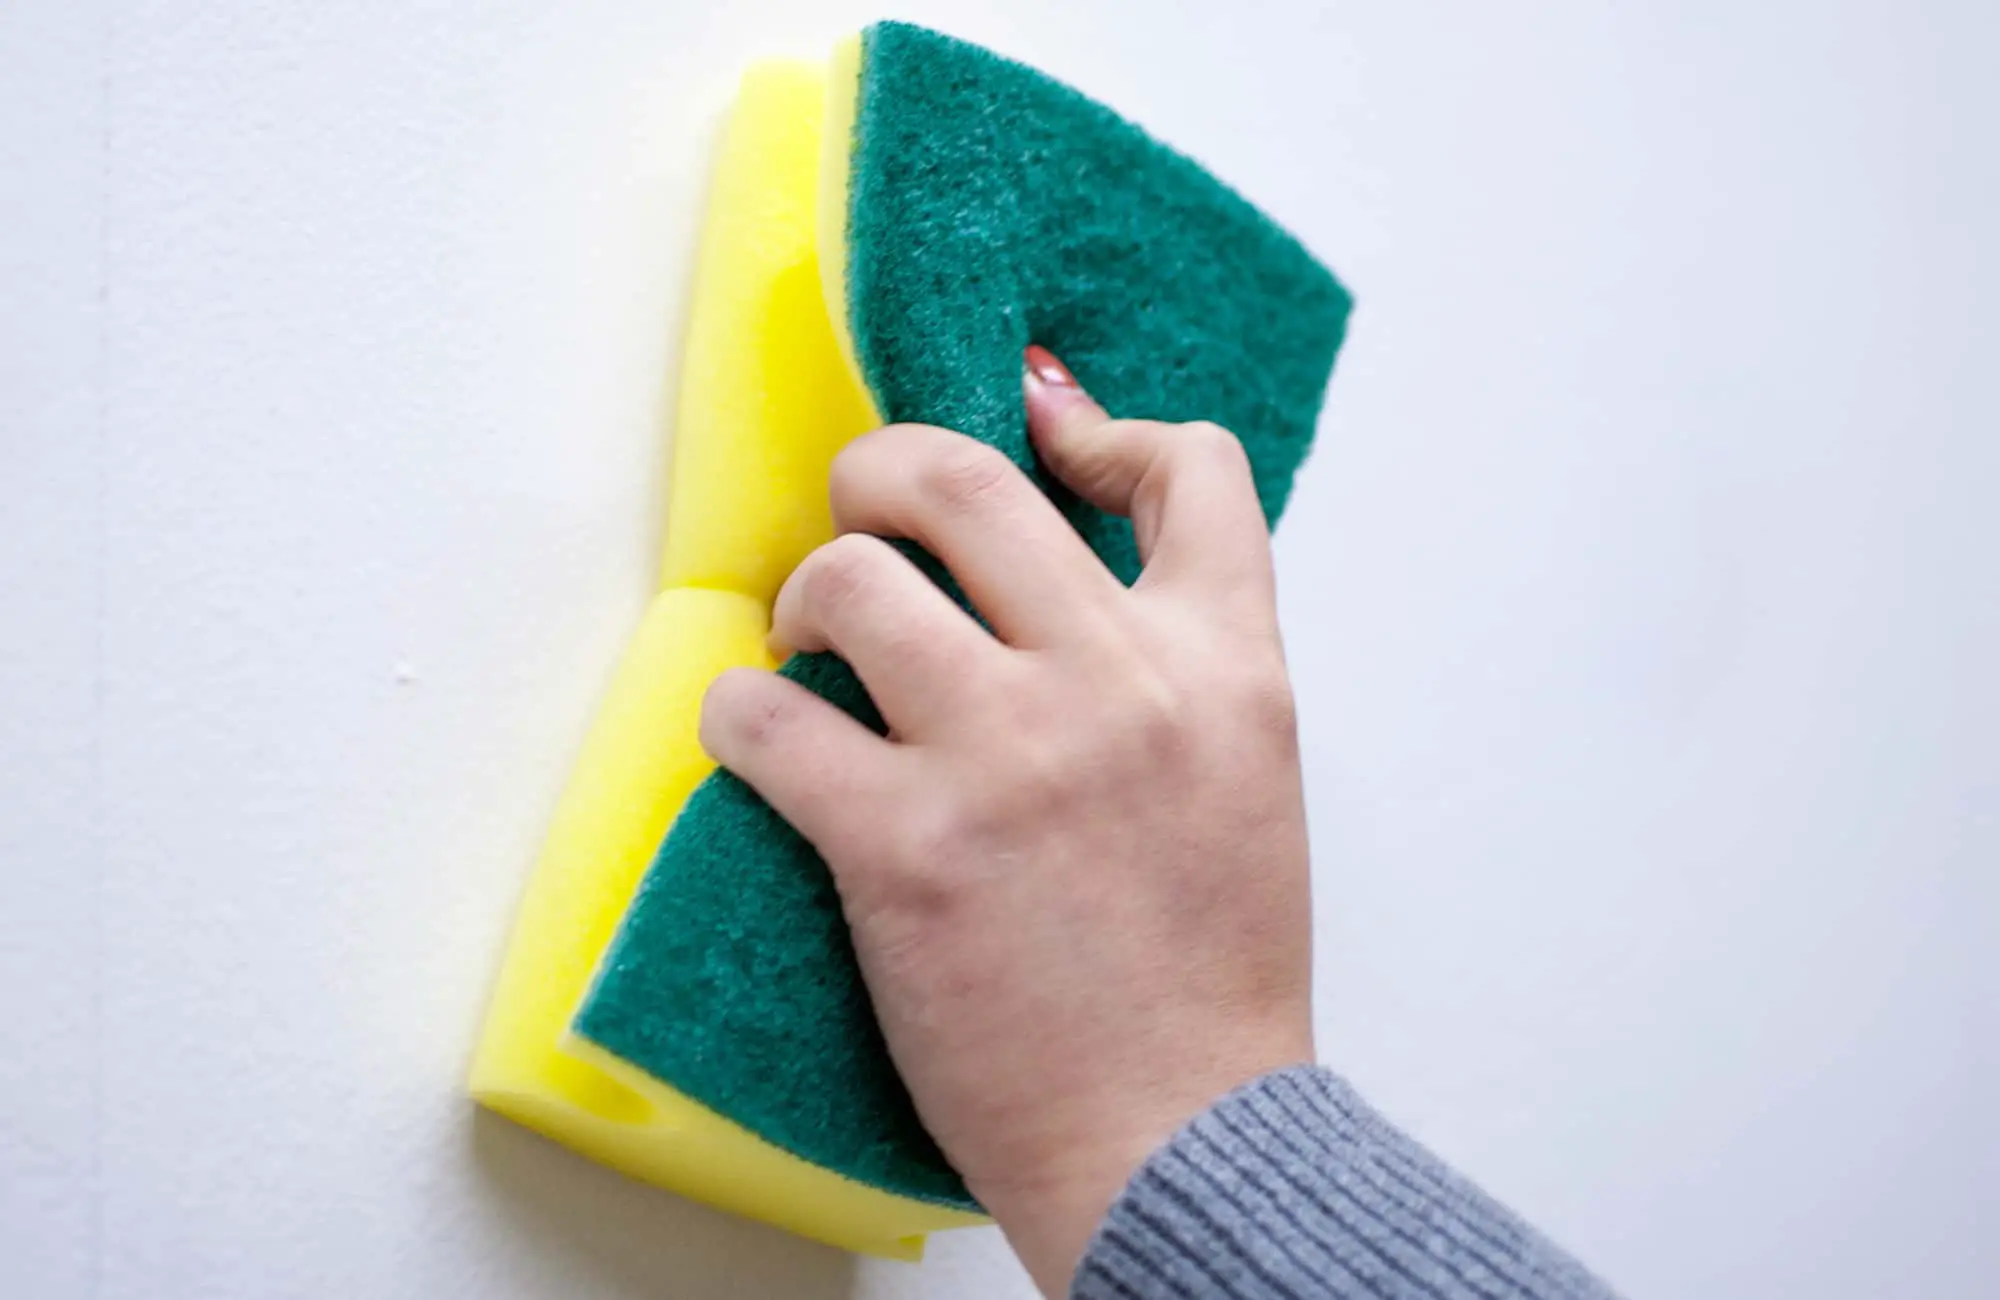 How To Remove Wallpaper Glue From Wall Before Painting